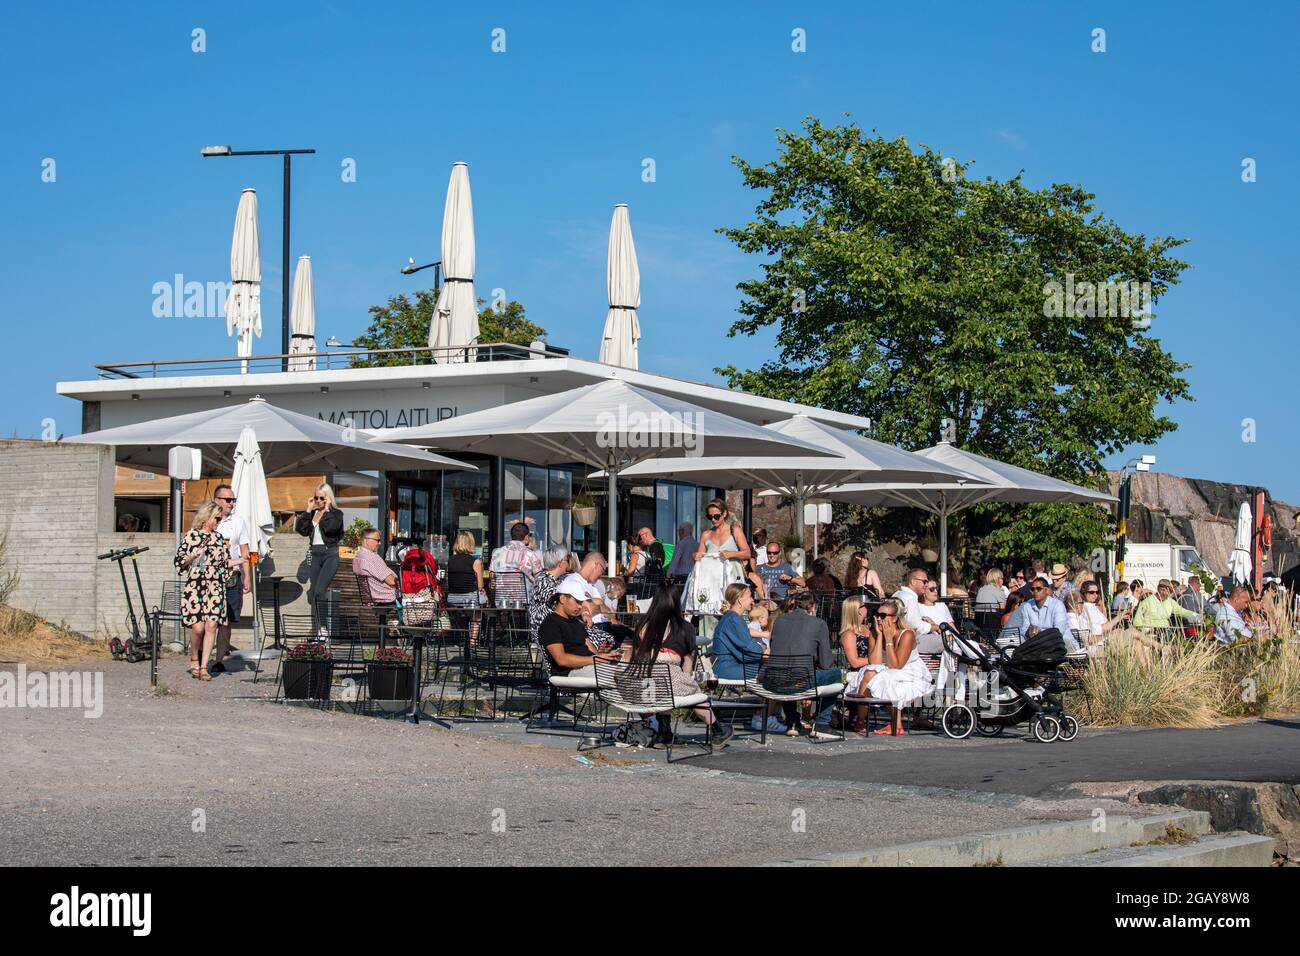 People enjoying beverages and warm summer evening at Mattolaituri outdoor café in Kaivopuisto district of Helsinki, Finland Stock Photo